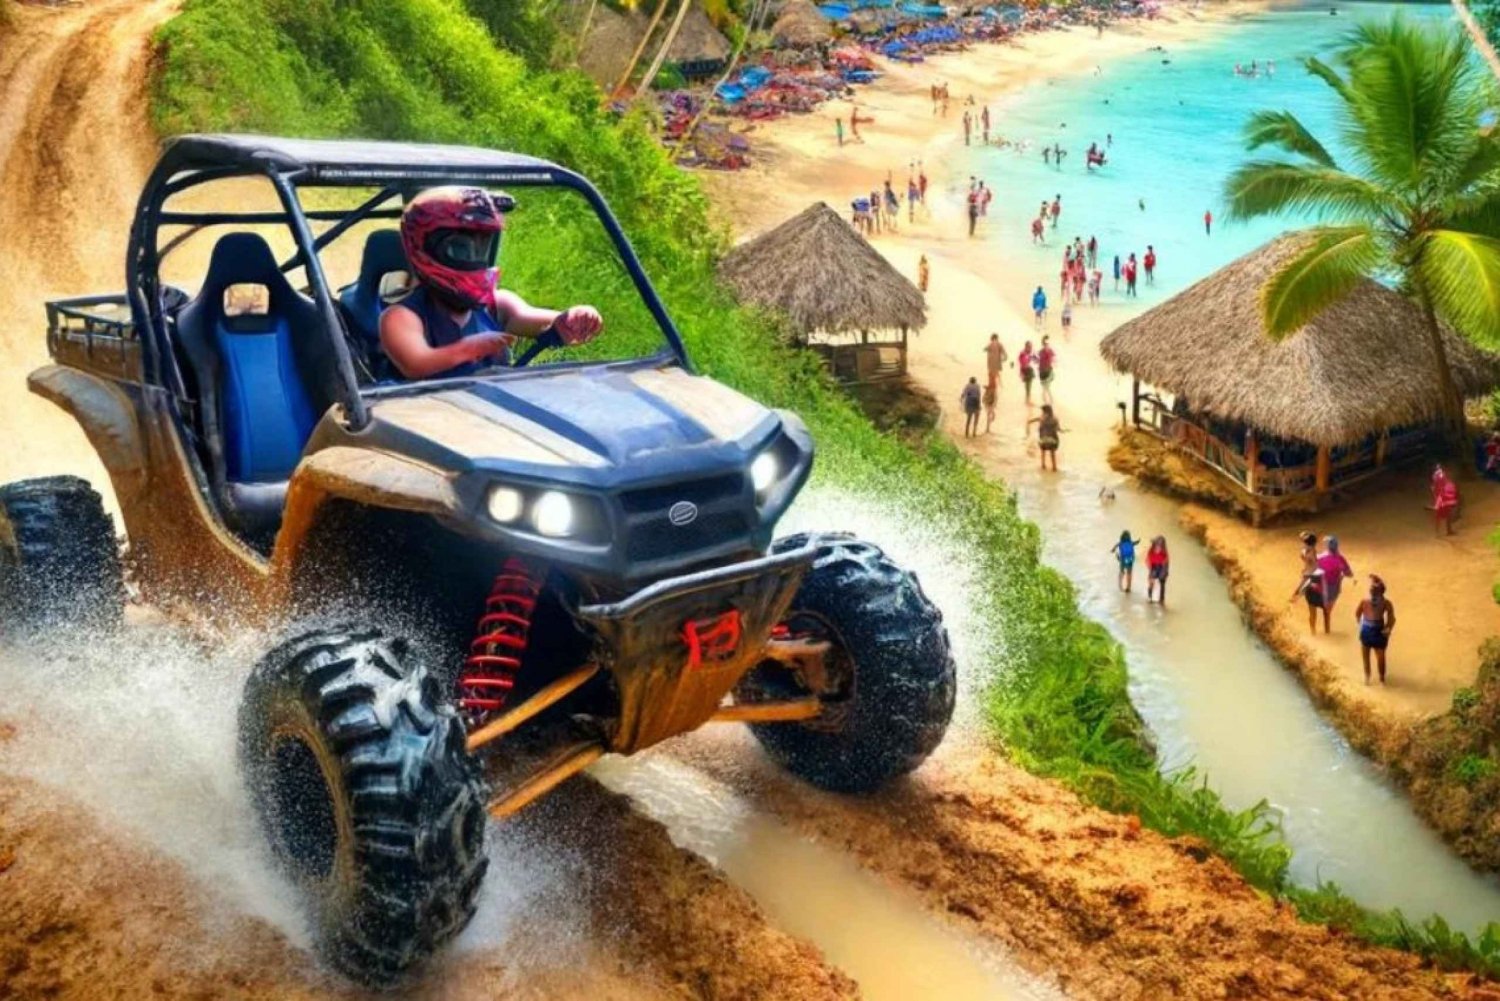 Buggy Adventure Macao Beach and the Jungle of Punta Cana